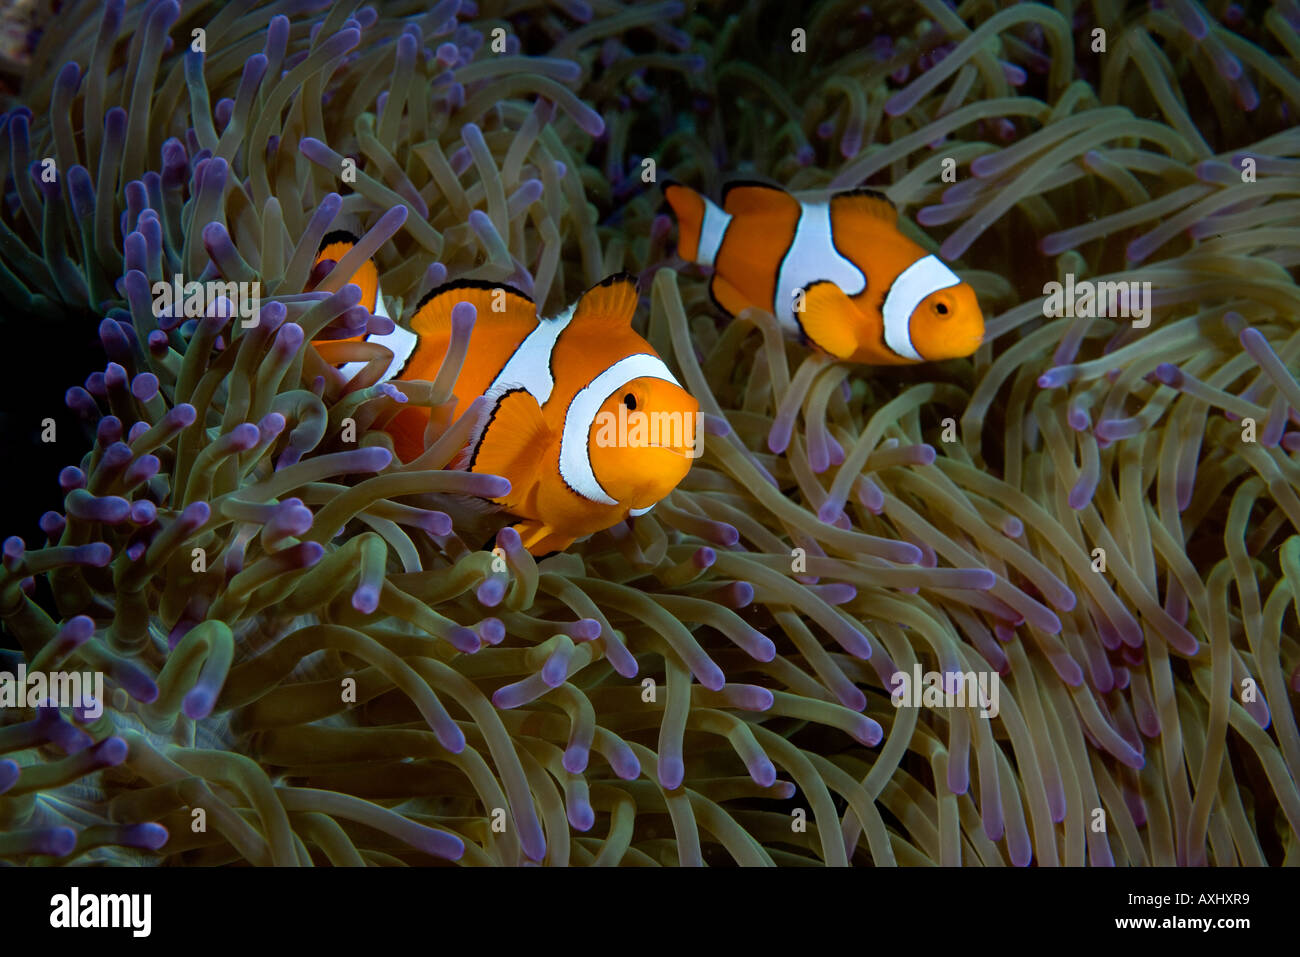 A PAIR OF FALSE CLOWN ANEMONEFISH AMPHIPRION OCELLARIS AMID THE PURPLE TIPPED TENTACLES OF A GIGANTIC SEA ANEMONE Stock Photo